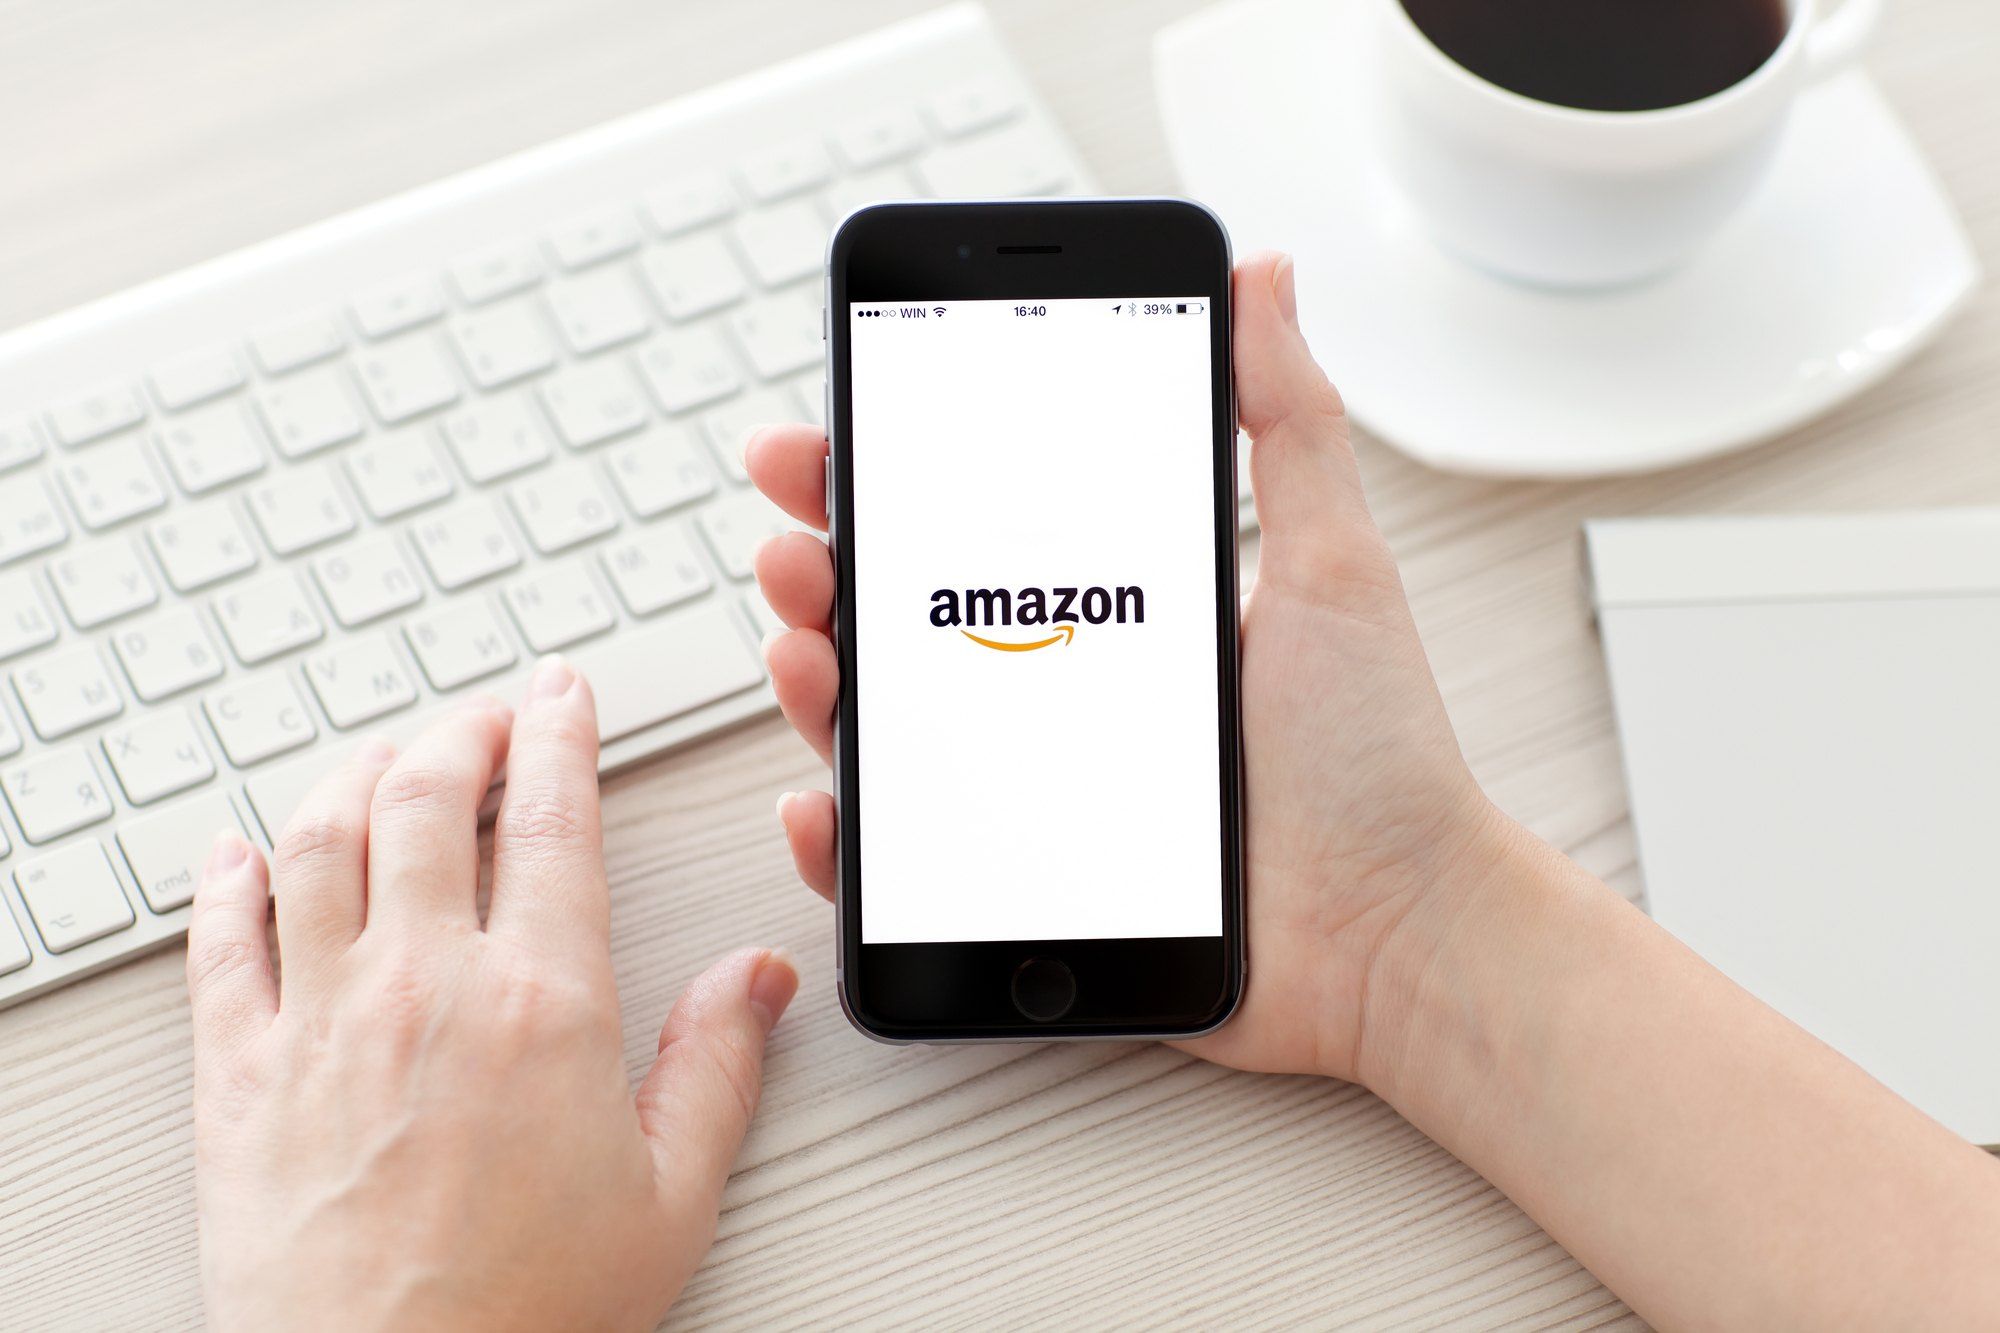 Amazon phone scams and robocalls are on the rise.